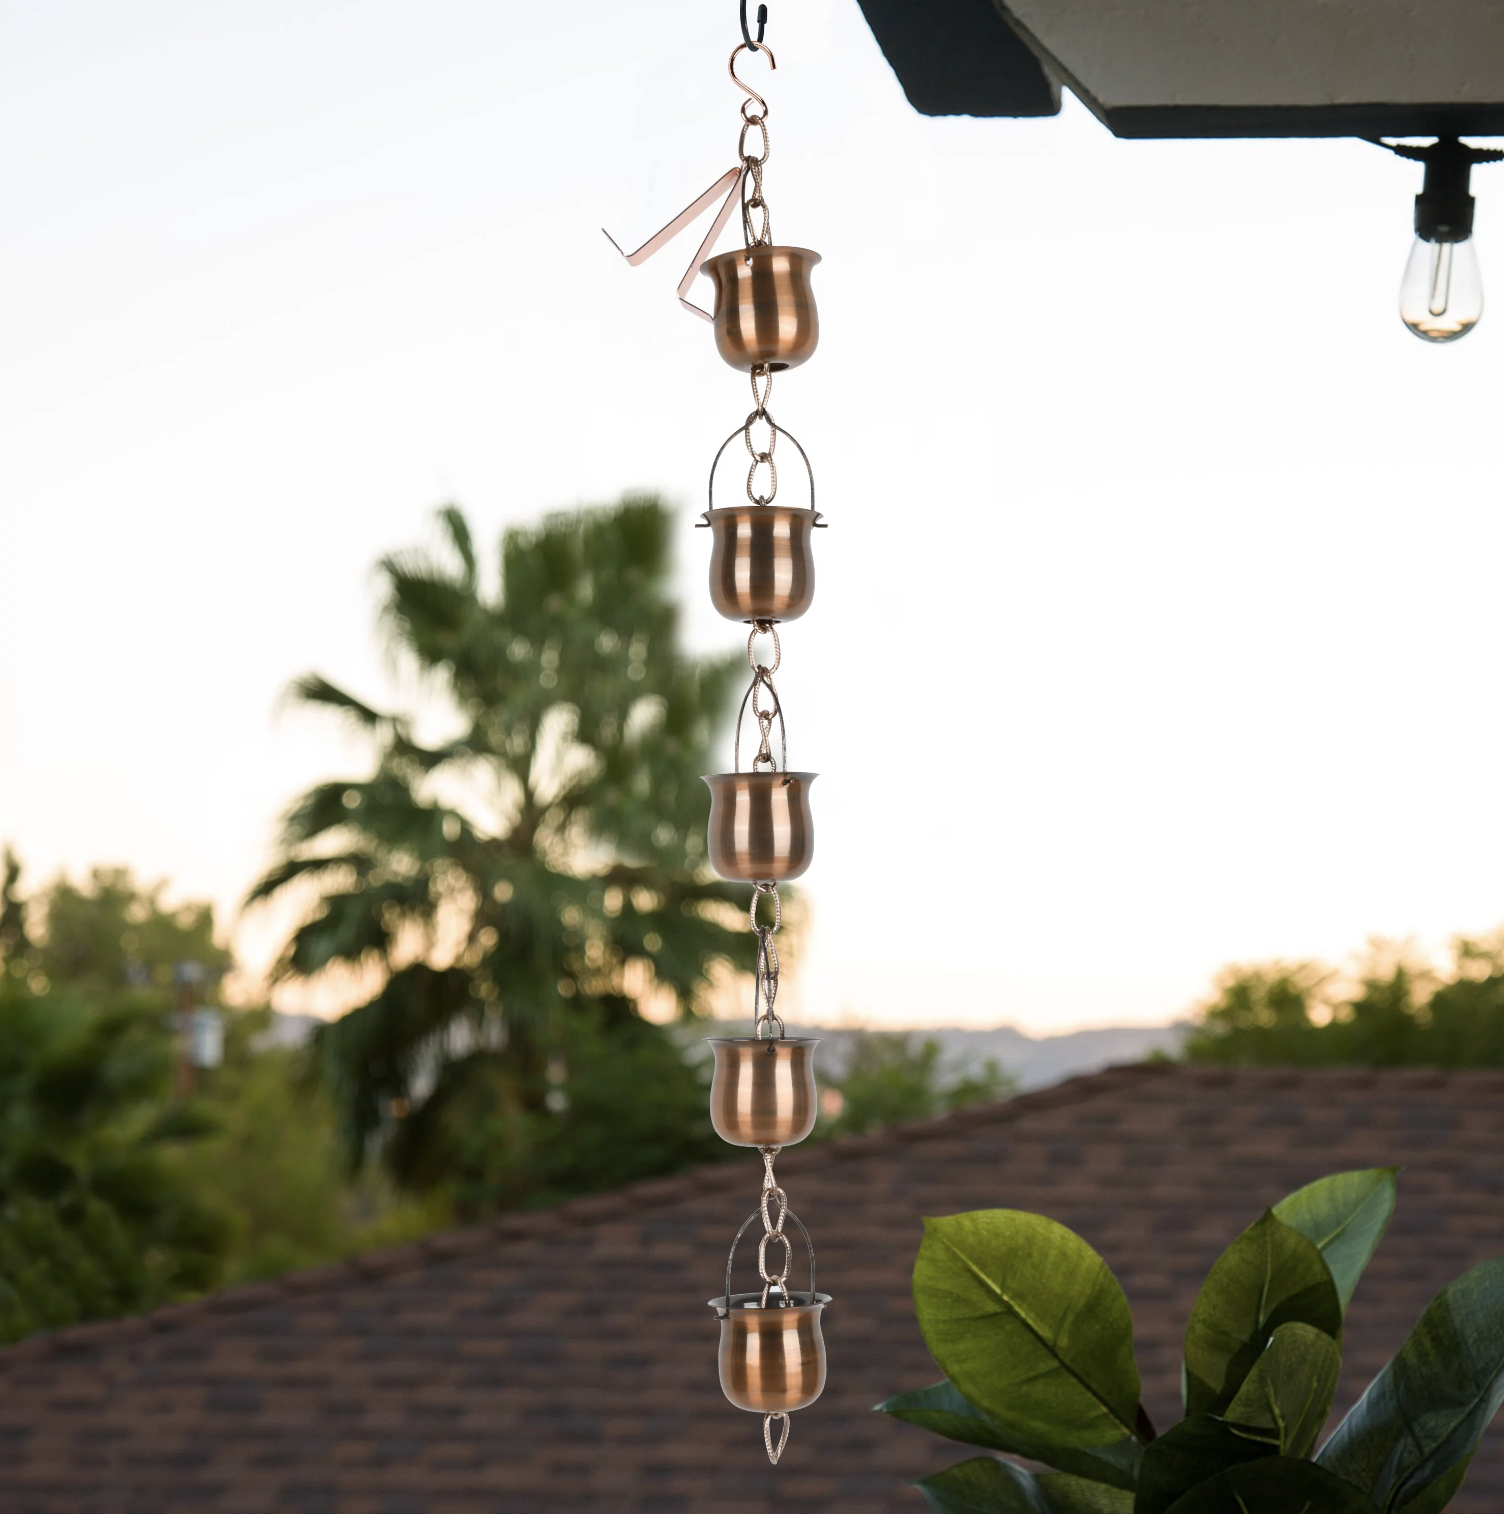 the copper rain chain hanging from a gutter